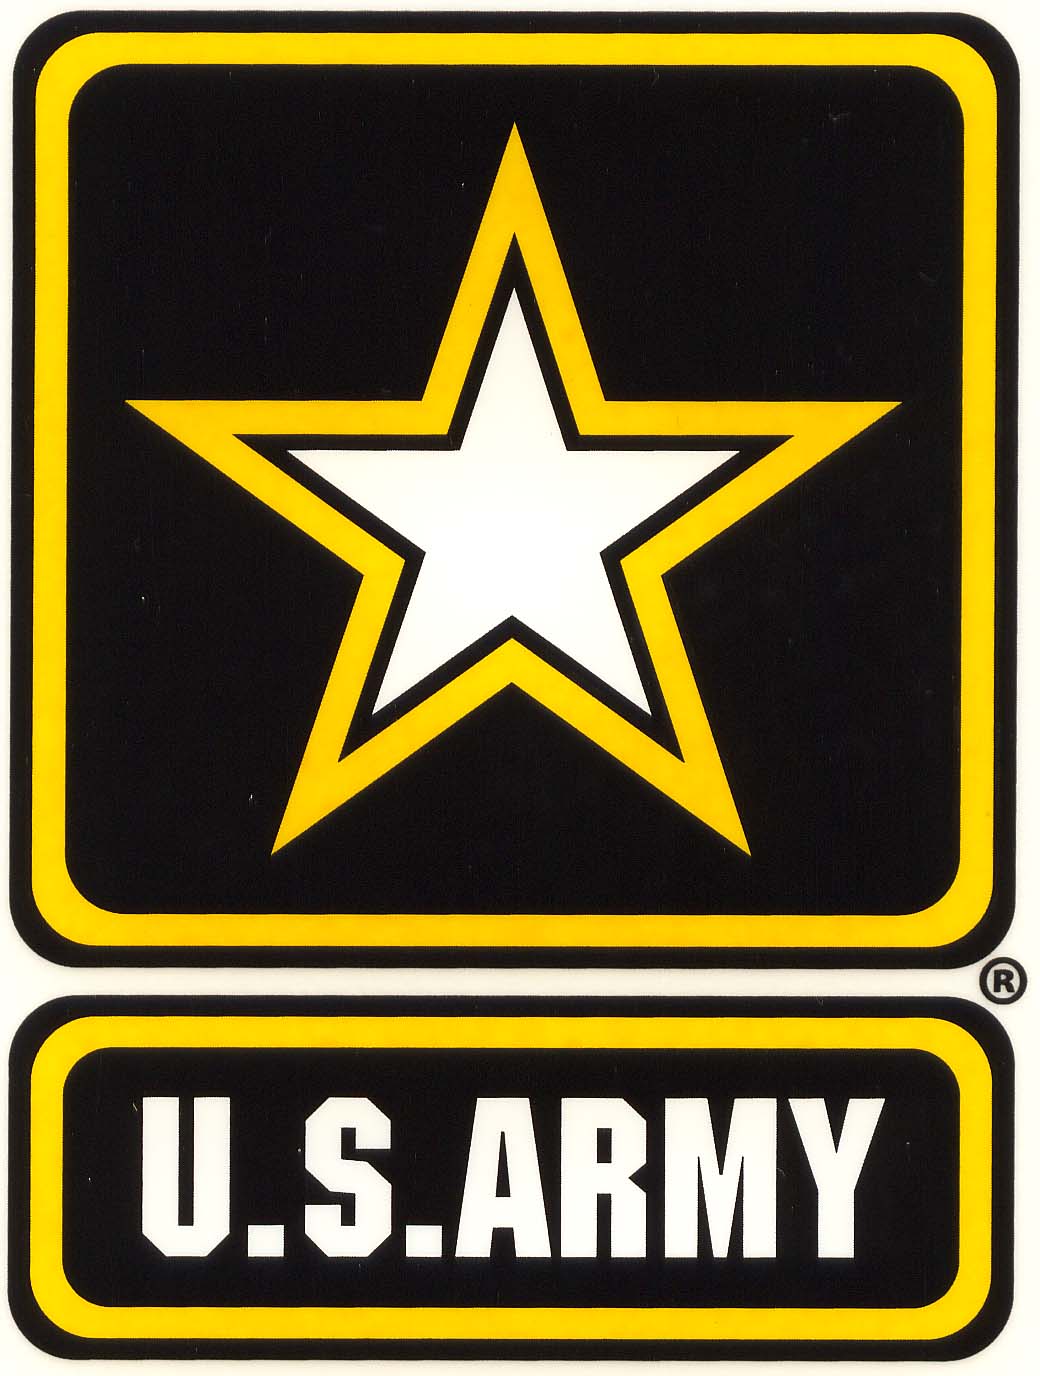 Army clip art clipart image